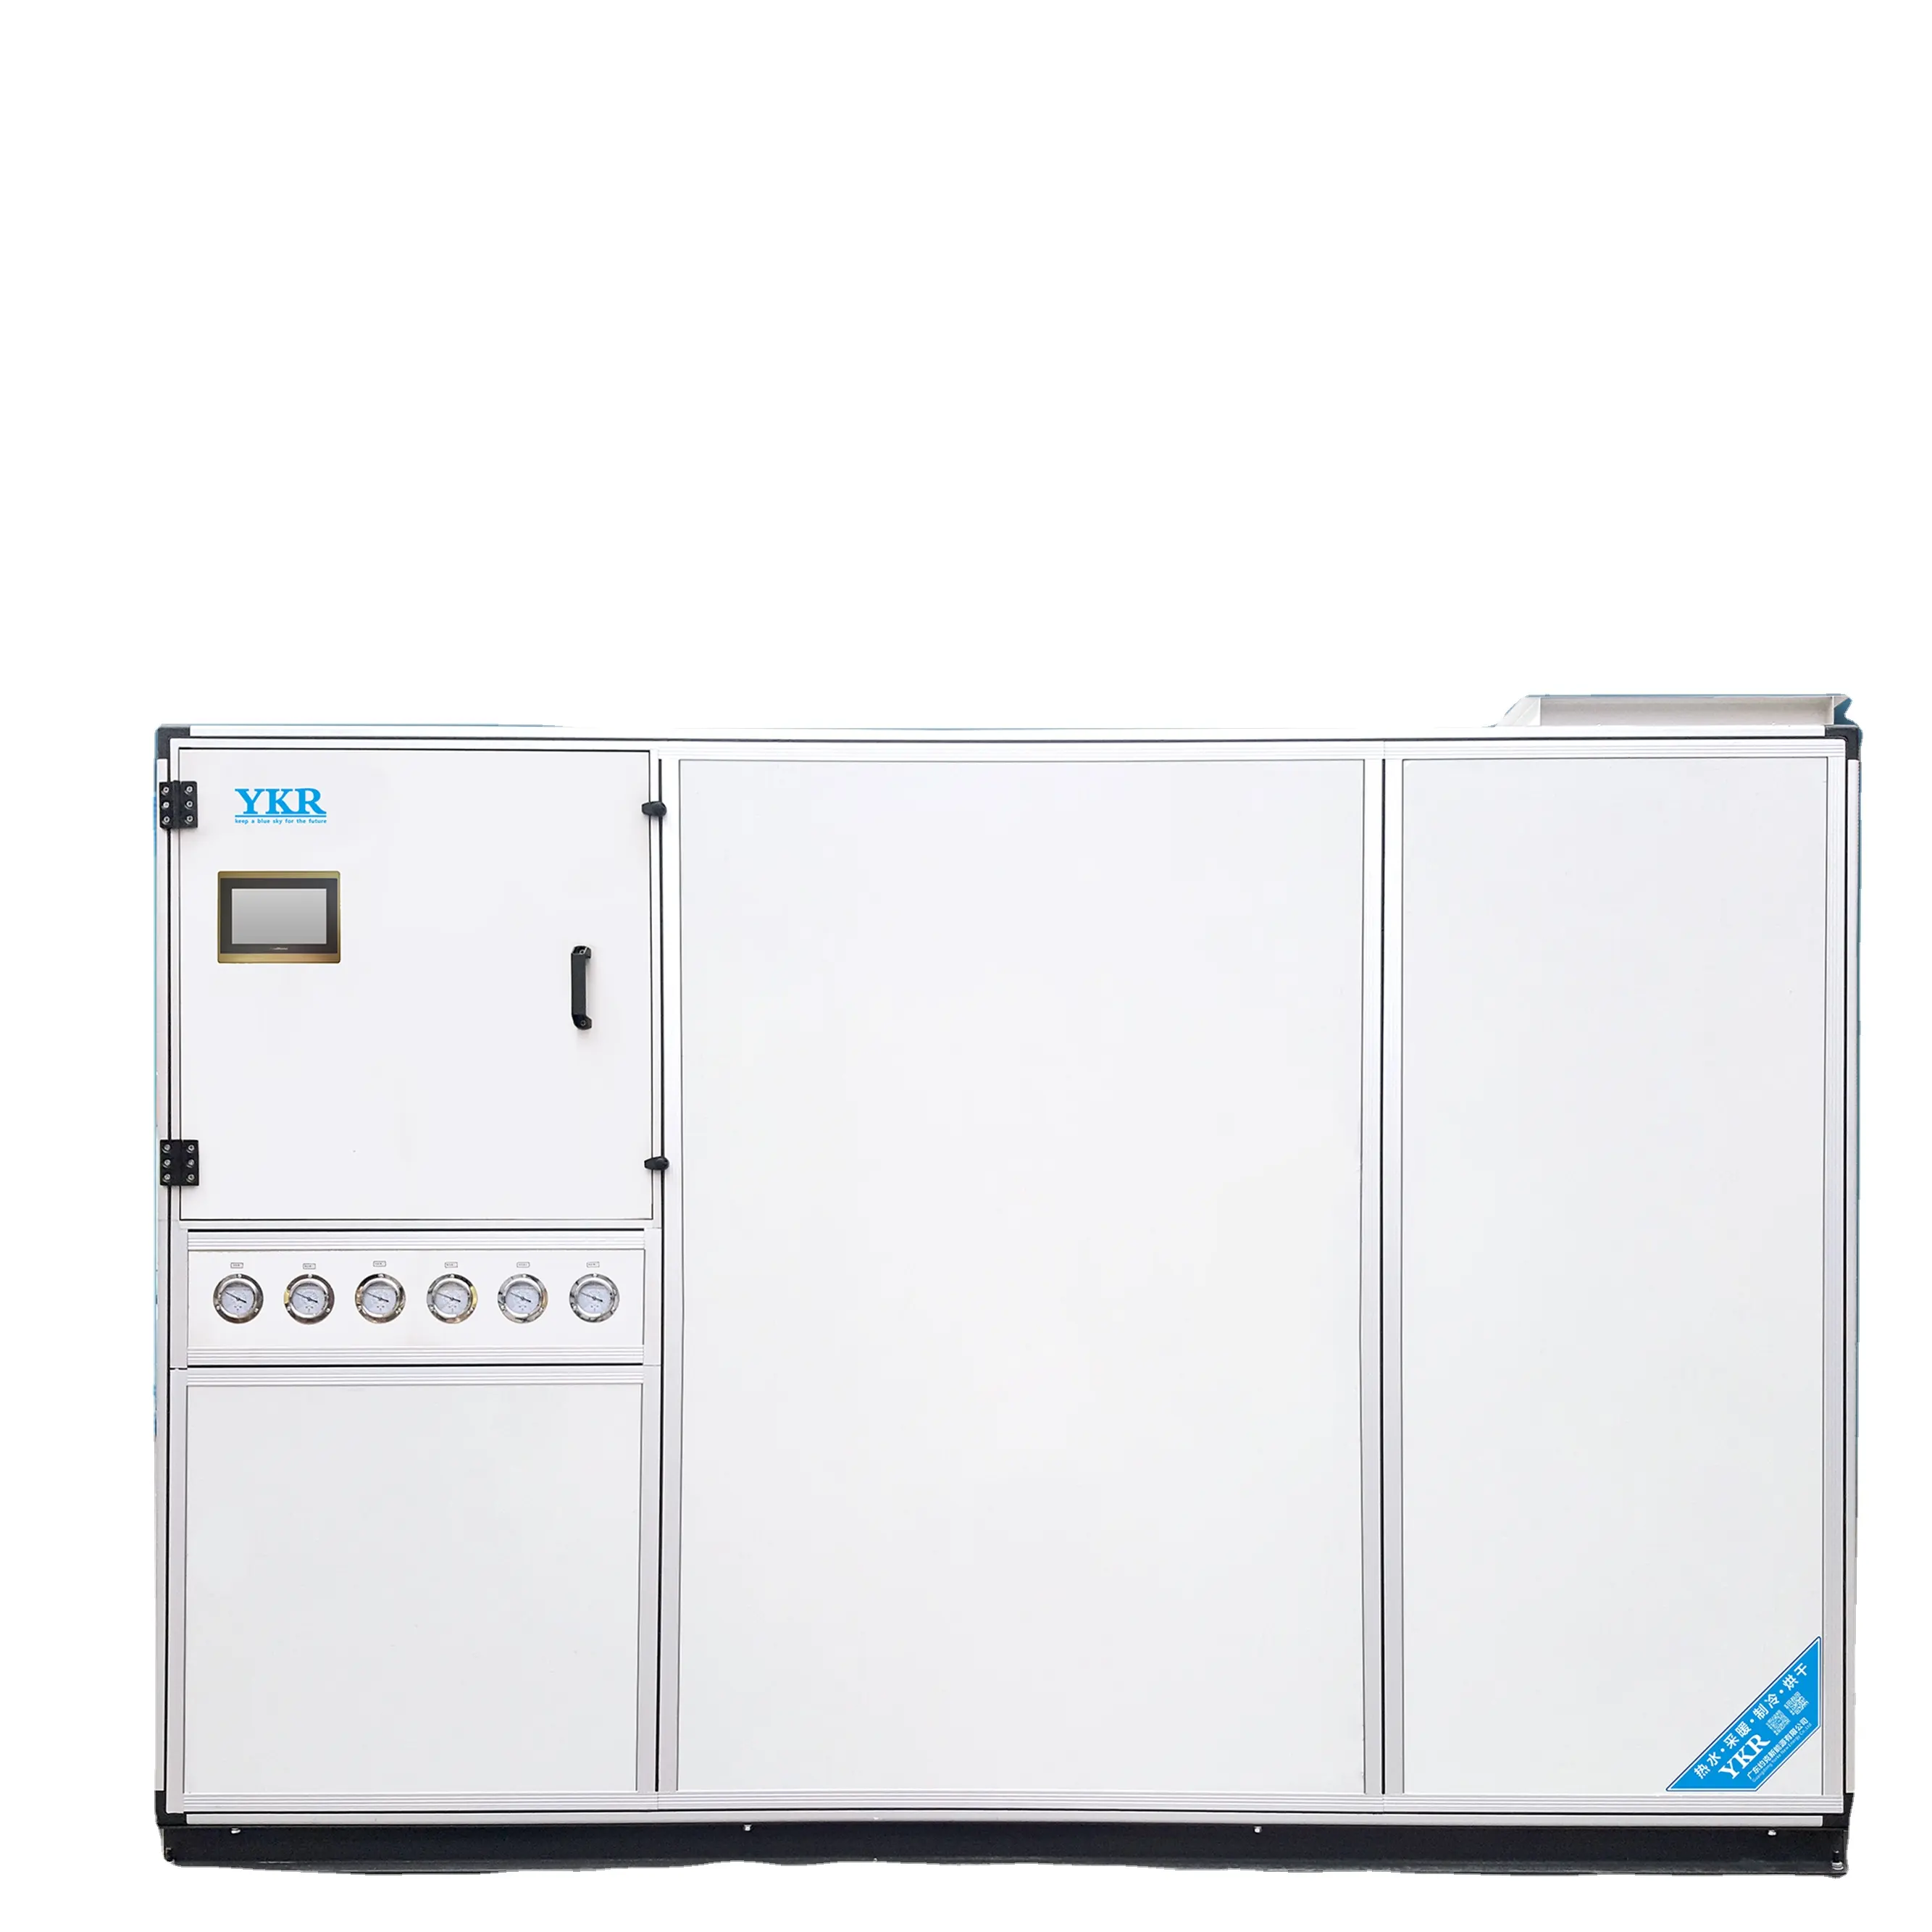 Swimming Pool Thermostats Dehumidifiers And Smart Swimming Pool Heat Pumps Can Be Used In Hotels